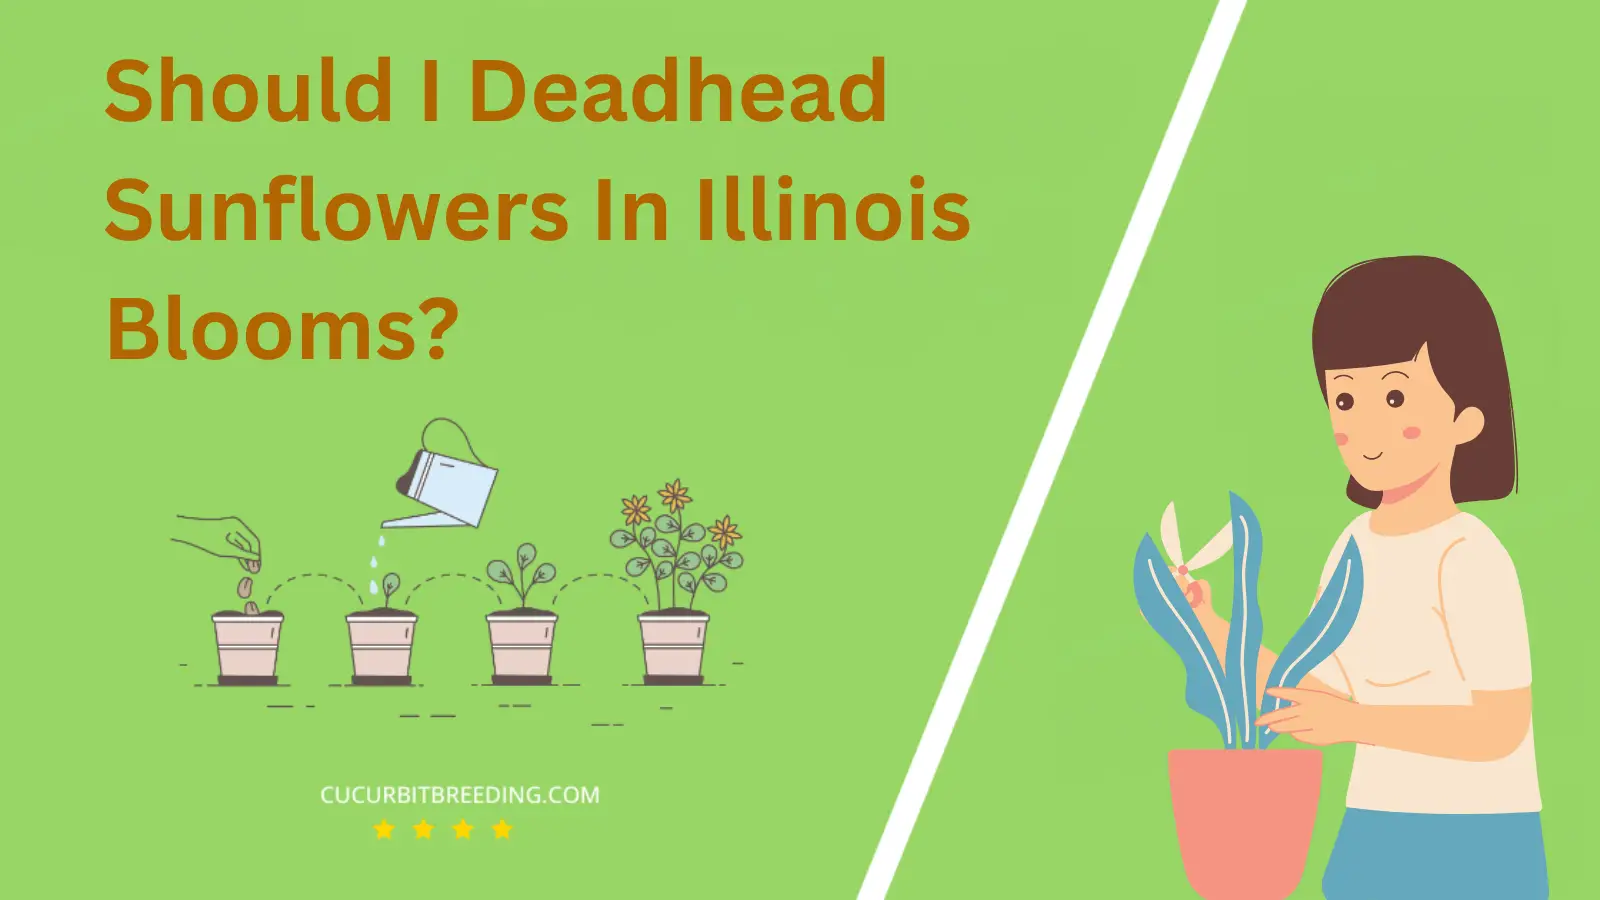 Should I Deadhead Sunflowers In Illinois Blooms?